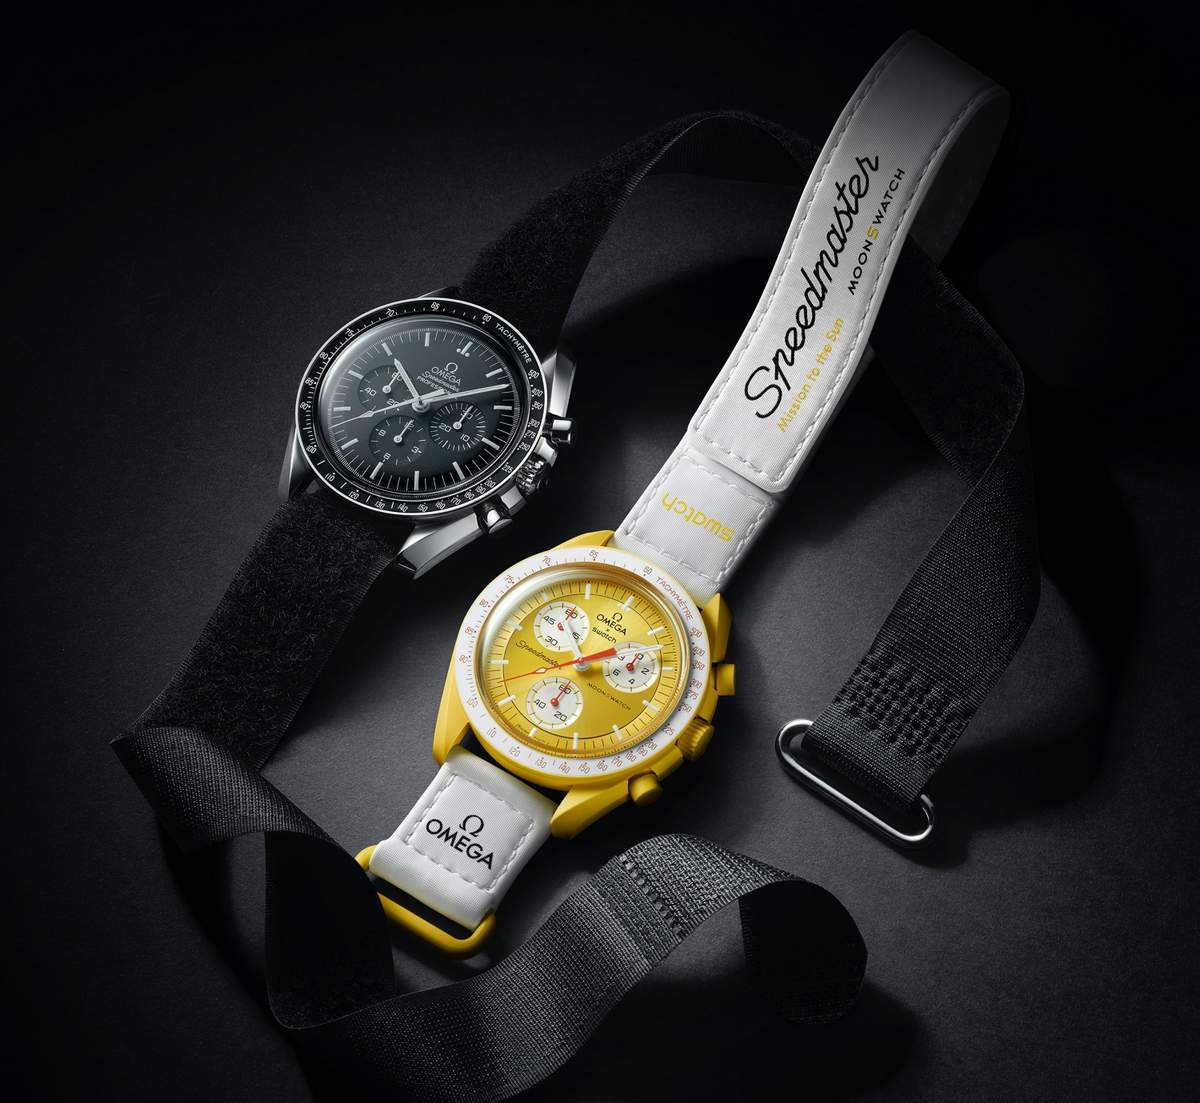 Omega x Swatch Speedmaster MoonSwatch Collection is too good to miss, with 11 iterations selling for an affordable $260